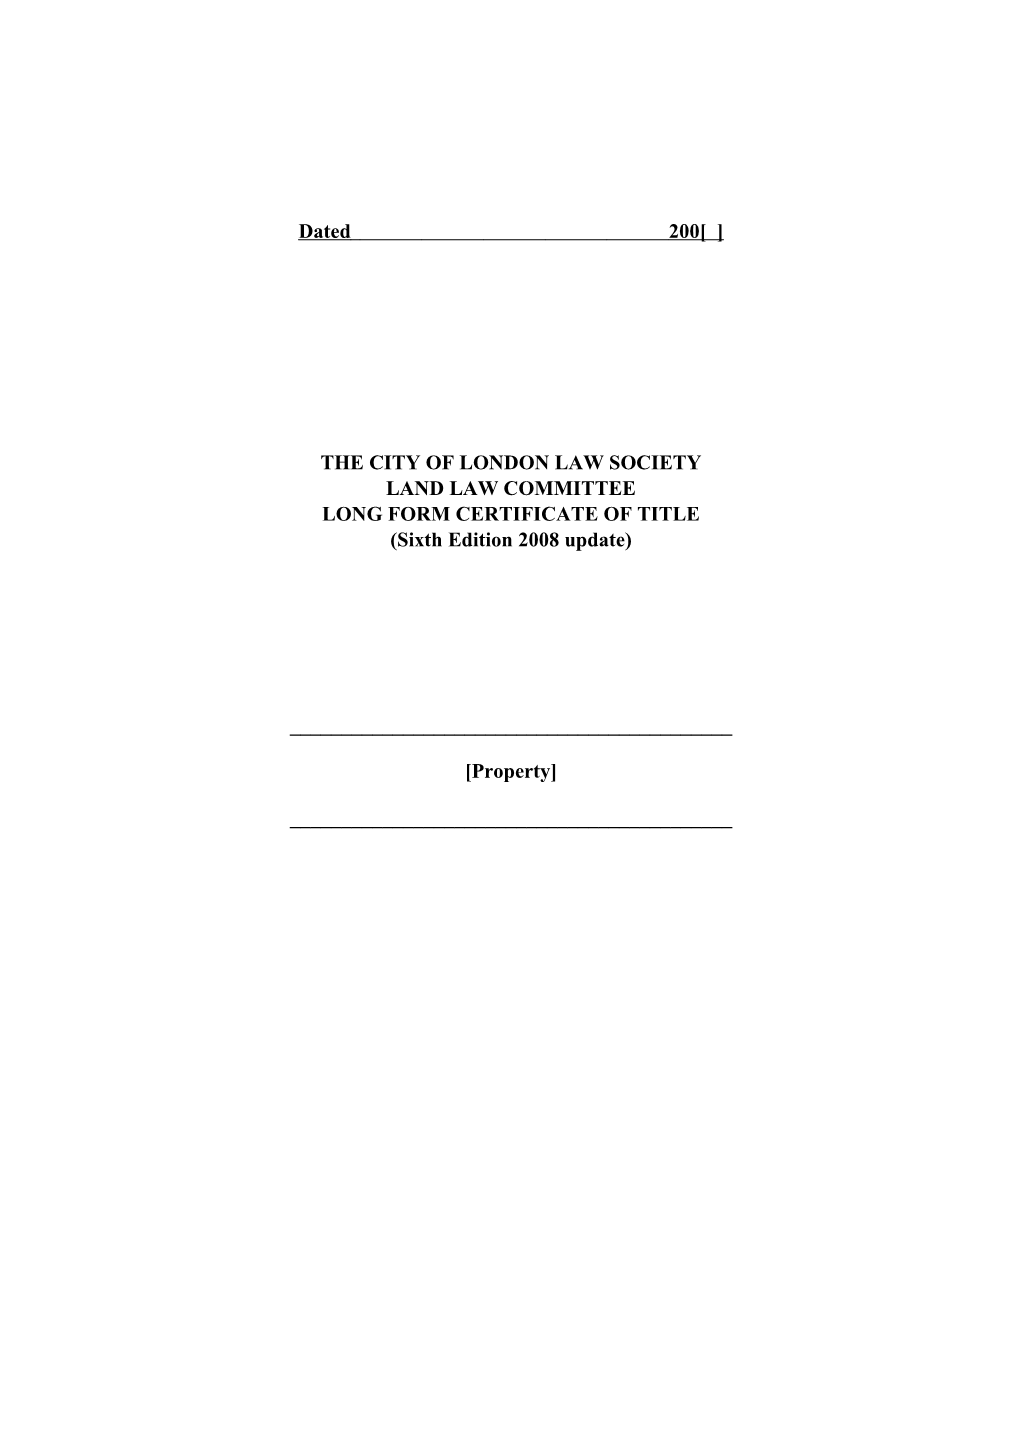 THE CITY of LONDON LAW SOCIETY LAND LAW COMMITTEE LONG FORM CERTIFICATE of TITLE (Sixth